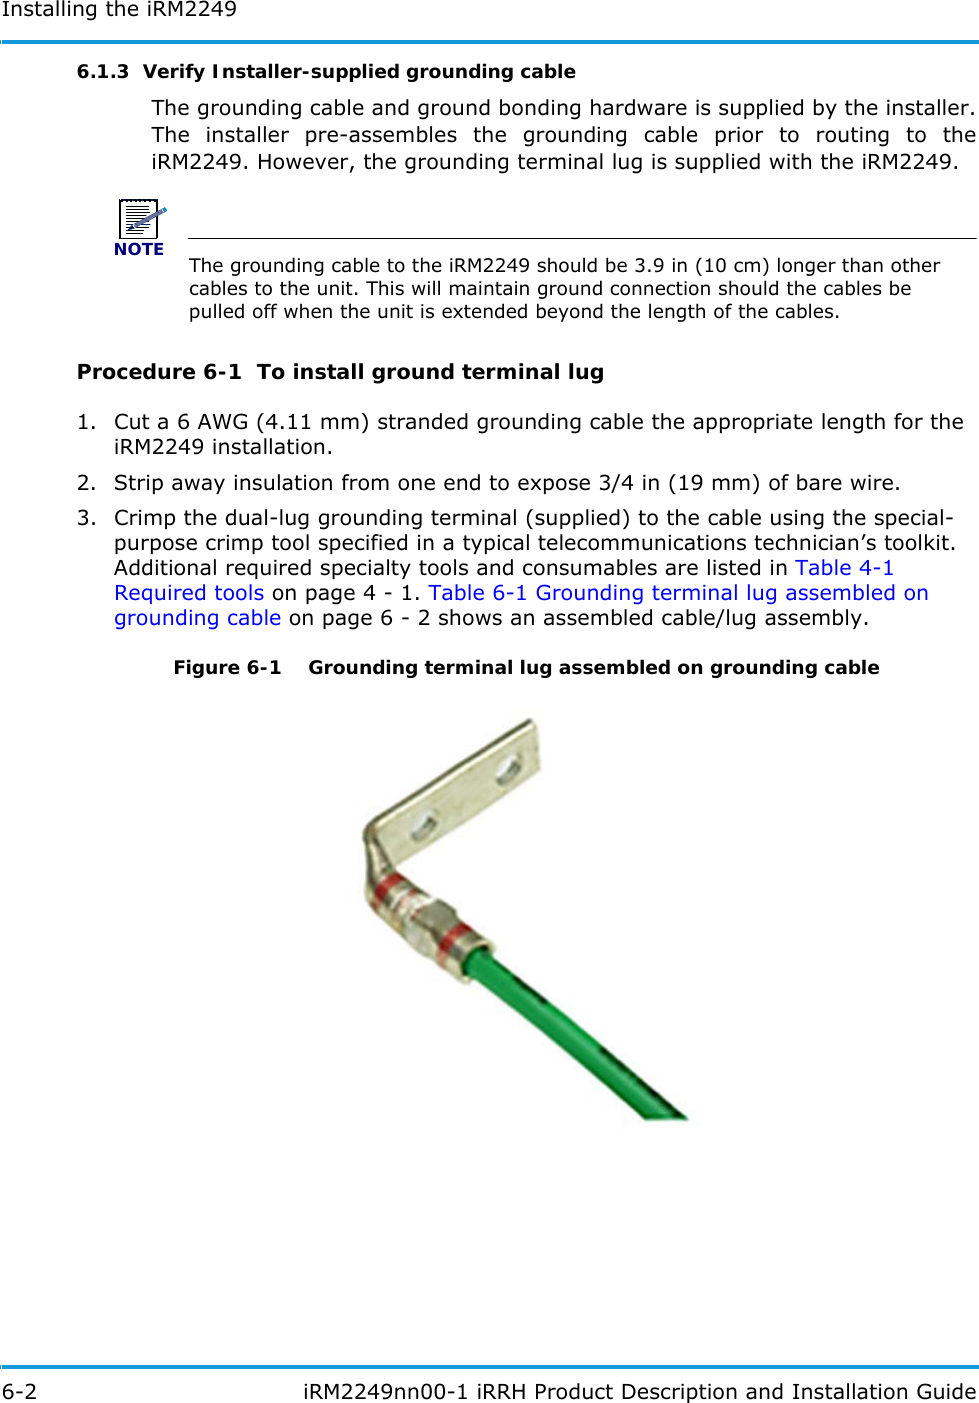 Installing the iRM22496-2  iRM2249nn00-1 iRRH Product Description and Installation Guide6.1.3  Verify Installer-supplied grounding cableThe grounding cable and ground bonding hardware is supplied by the installer. The installer pre-assembles the grounding cable prior to routing to the iRM2249. However, the grounding terminal lug is supplied with the iRM2249. NOTEThe grounding cable to the iRM2249 should be 3.9 in (10 cm) longer than other cables to the unit. This will maintain ground connection should the cables be pulled off when the unit is extended beyond the length of the cables.Procedure 6-1  To install ground terminal lug1. Cut a 6 AWG (4.11 mm) stranded grounding cable the appropriate length for the iRM2249 installation.2. Strip away insulation from one end to expose 3/4 in (19 mm) of bare wire.3. Crimp the dual-lug grounding terminal (supplied) to the cable using the special-purpose crimp tool specified in a typical telecommunications technician’s toolkit. Additional required specialty tools and consumables are listed in Table 4-1 Required tools on page 4 - 1. Table 6-1 Grounding terminal lug assembled on grounding cable on page 6 - 2 shows an assembled cable/lug assembly.Figure 6-1   Grounding terminal lug assembled on grounding cable